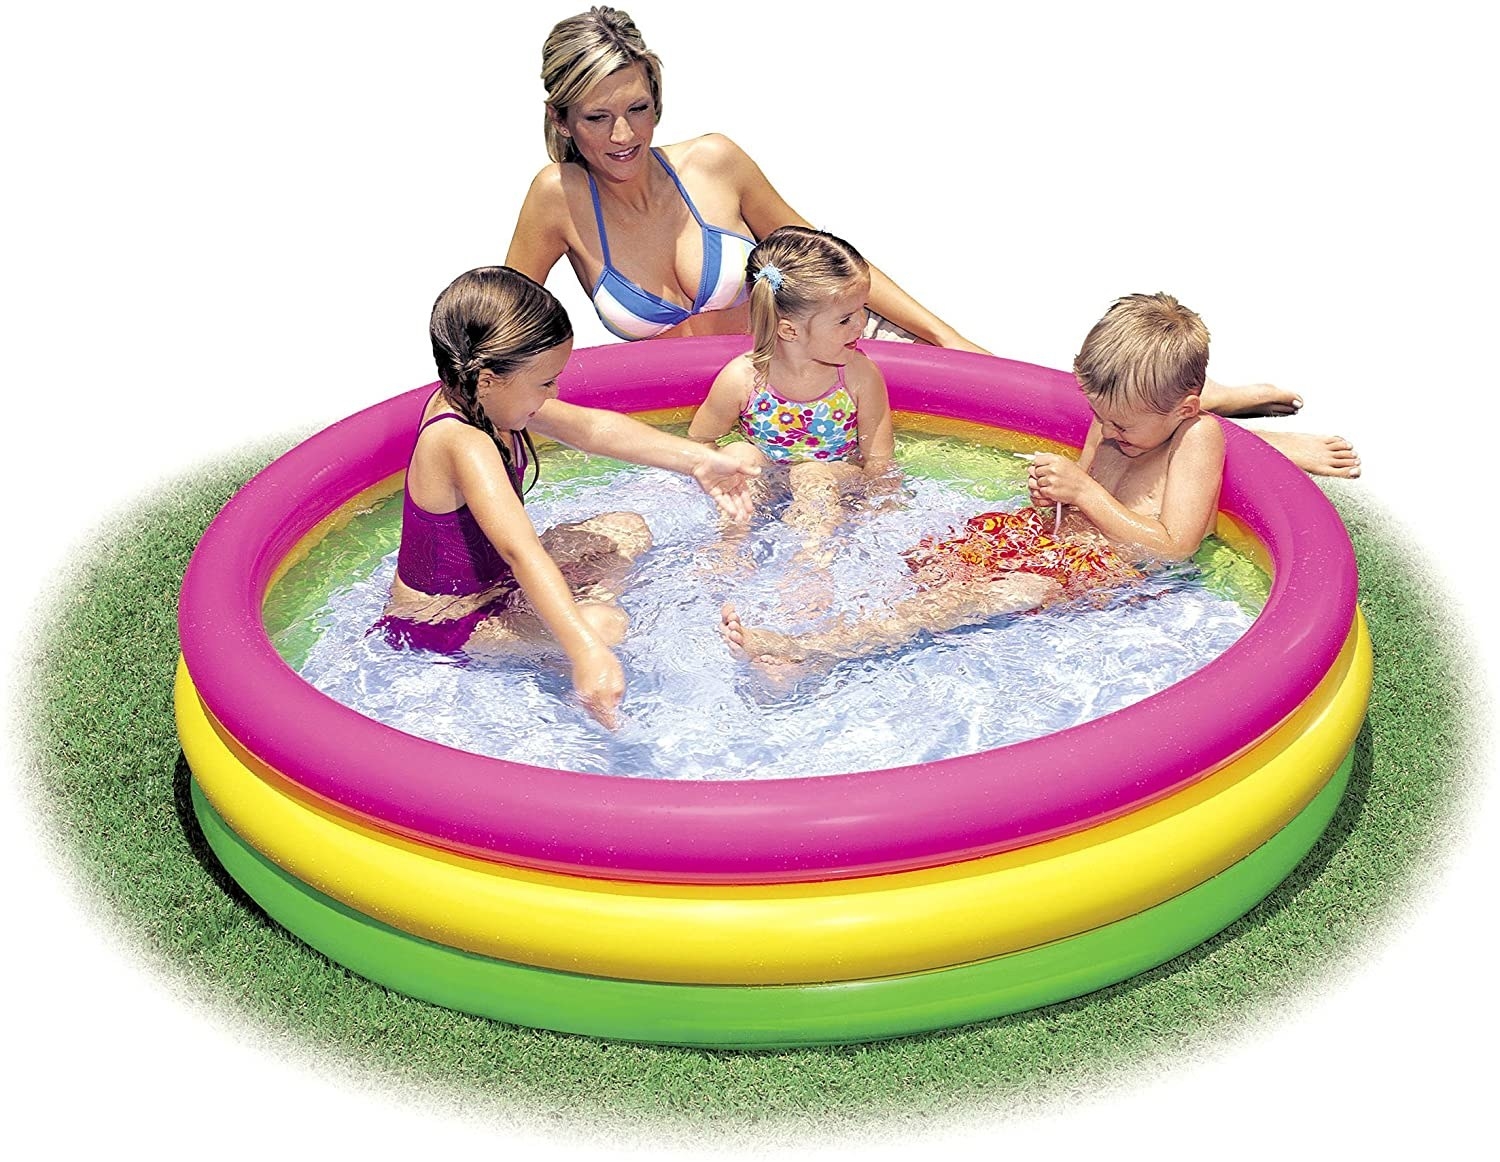 Three kids in the small pool; it has three tubes of green, yellow, and pink forming the walls